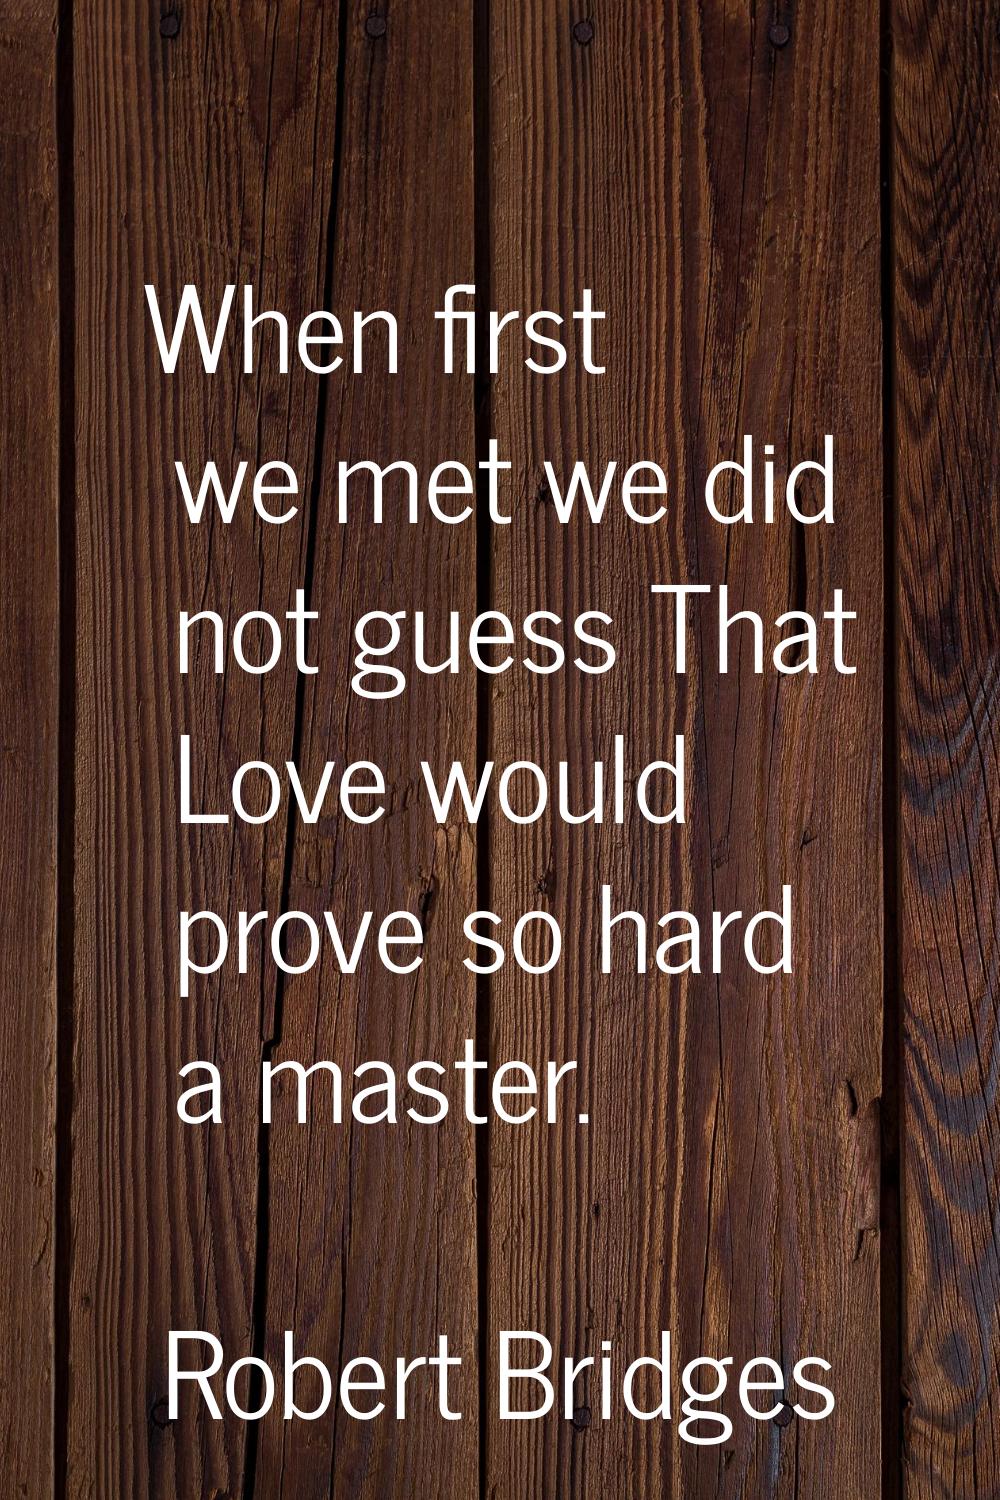 When first we met we did not guess That Love would prove so hard a master.